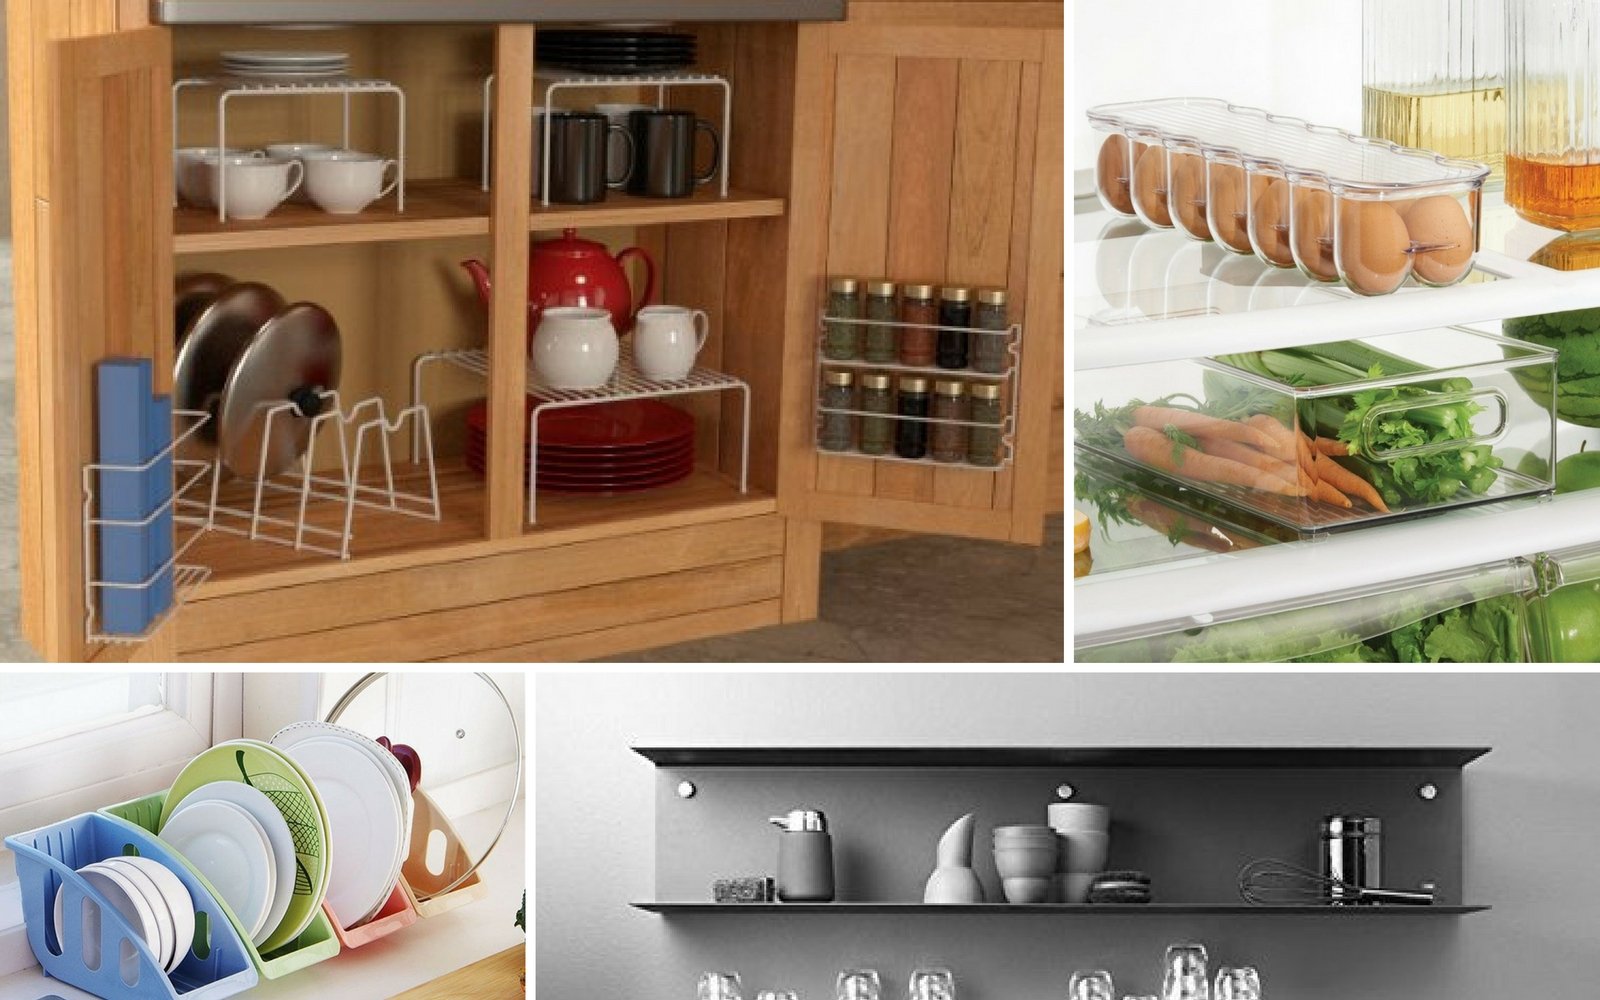 18 Smart Organizing Ideas For Your Kitchen by Archana's Kitchen